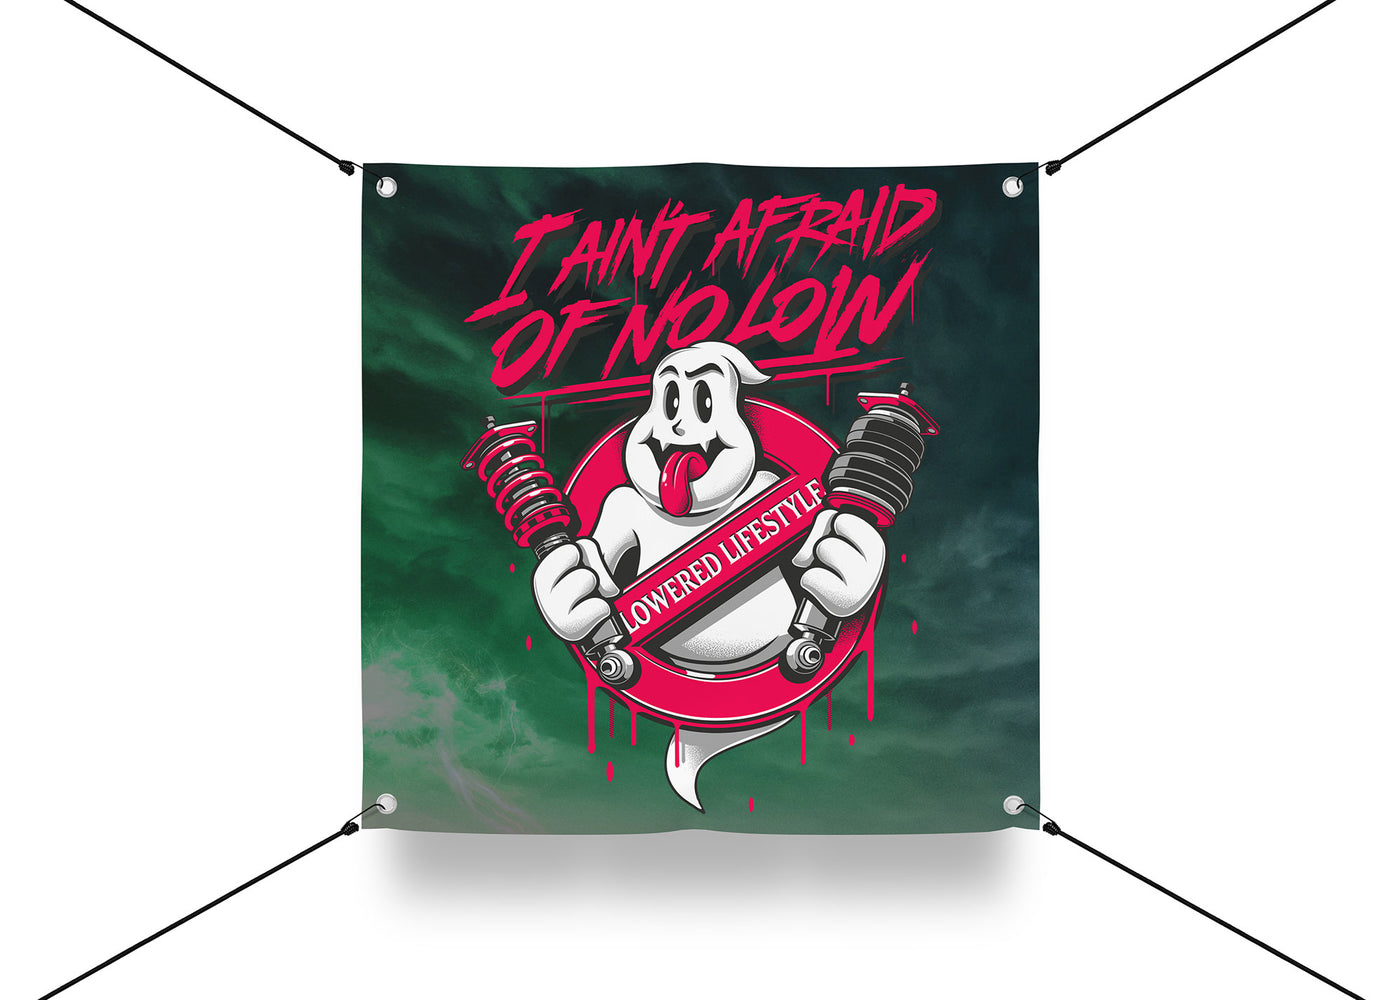 Garage Banner – Ain't Afraid Of No Low (Limited Edition)